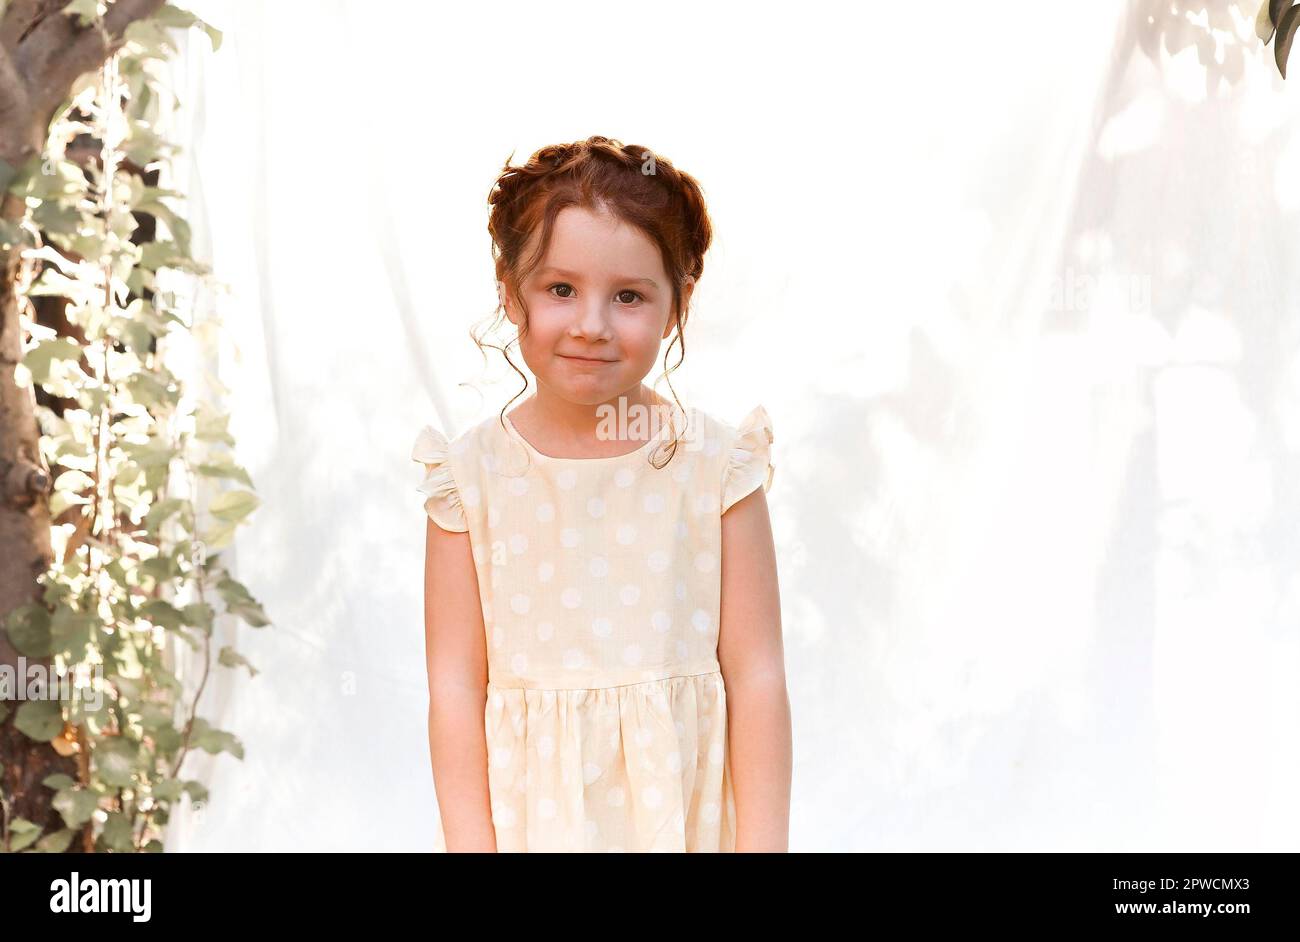 Close up portrait of cute little adorable redhead girl with curly hair with braid wearing yellow dotted dress looking at camera while playing in Stock Photo